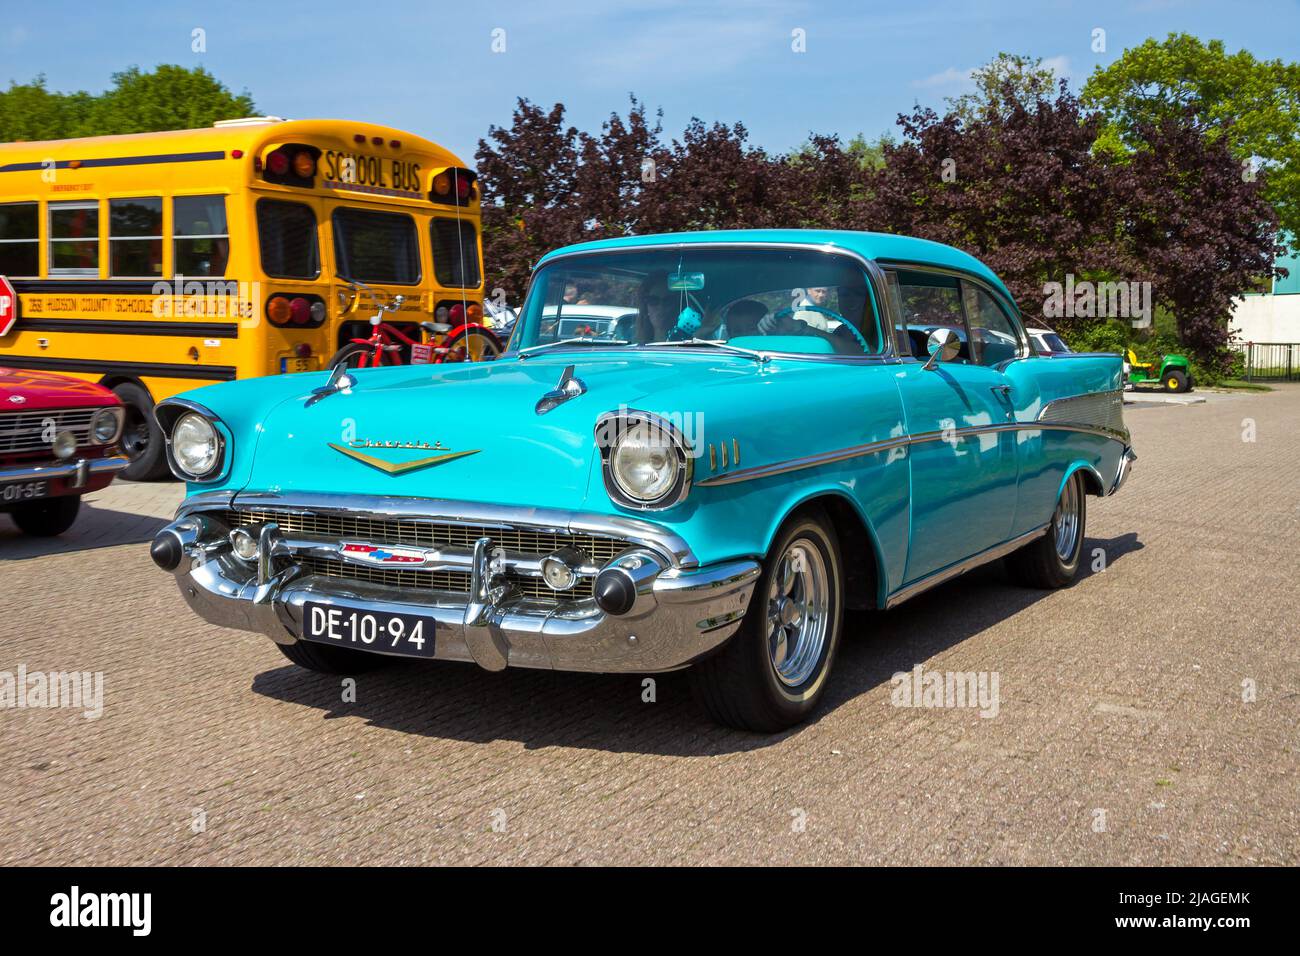 1957 Chevrolet Bel-Air classic American car in Rosmalen, The Netherlands - May 10, 2015 Stock Photo